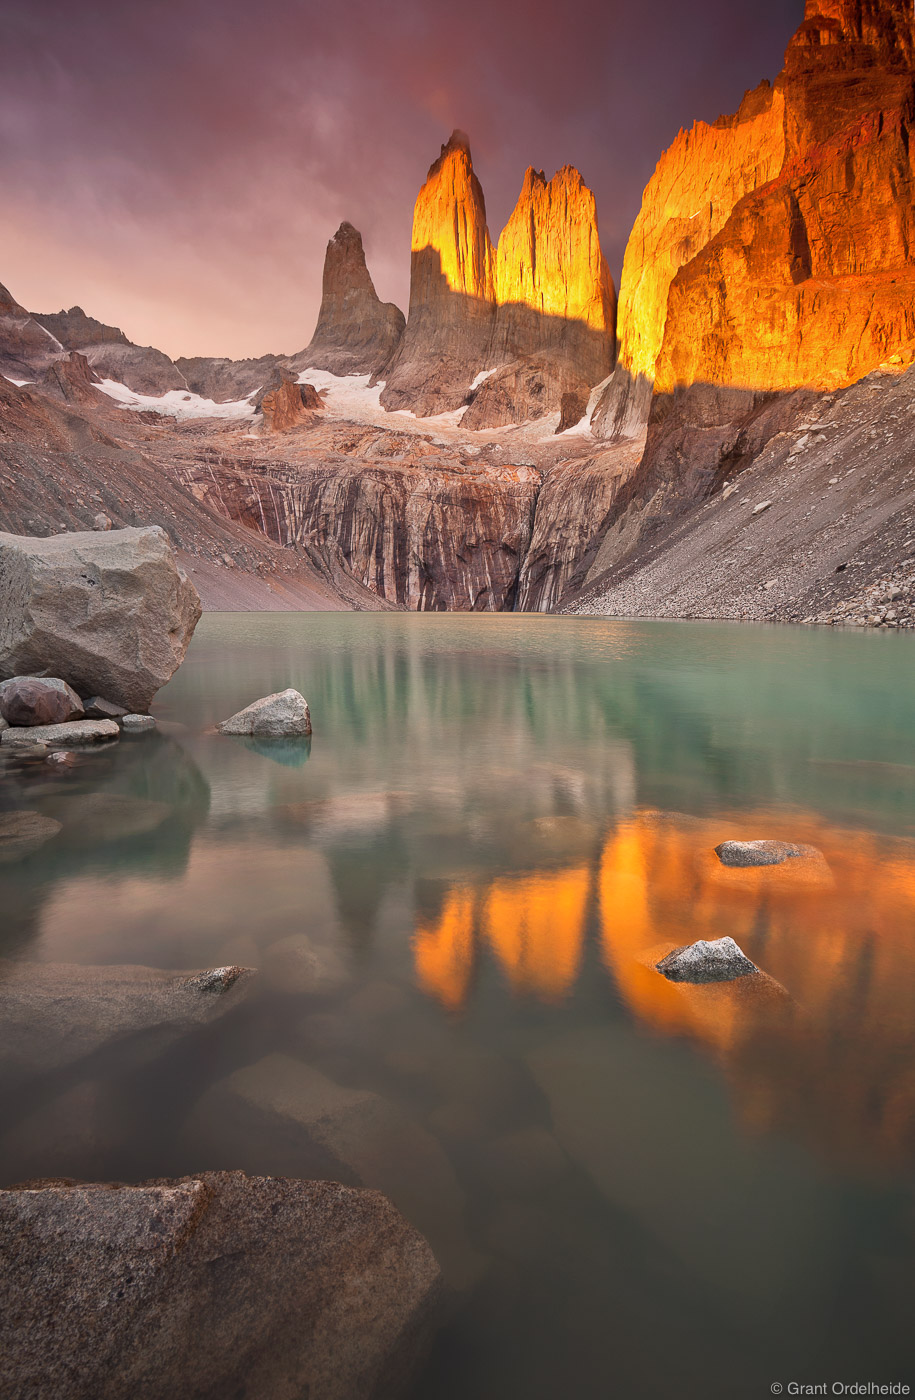 The impressive Towers of Paine at sunrise in Chile's Torres del Paine National Park.